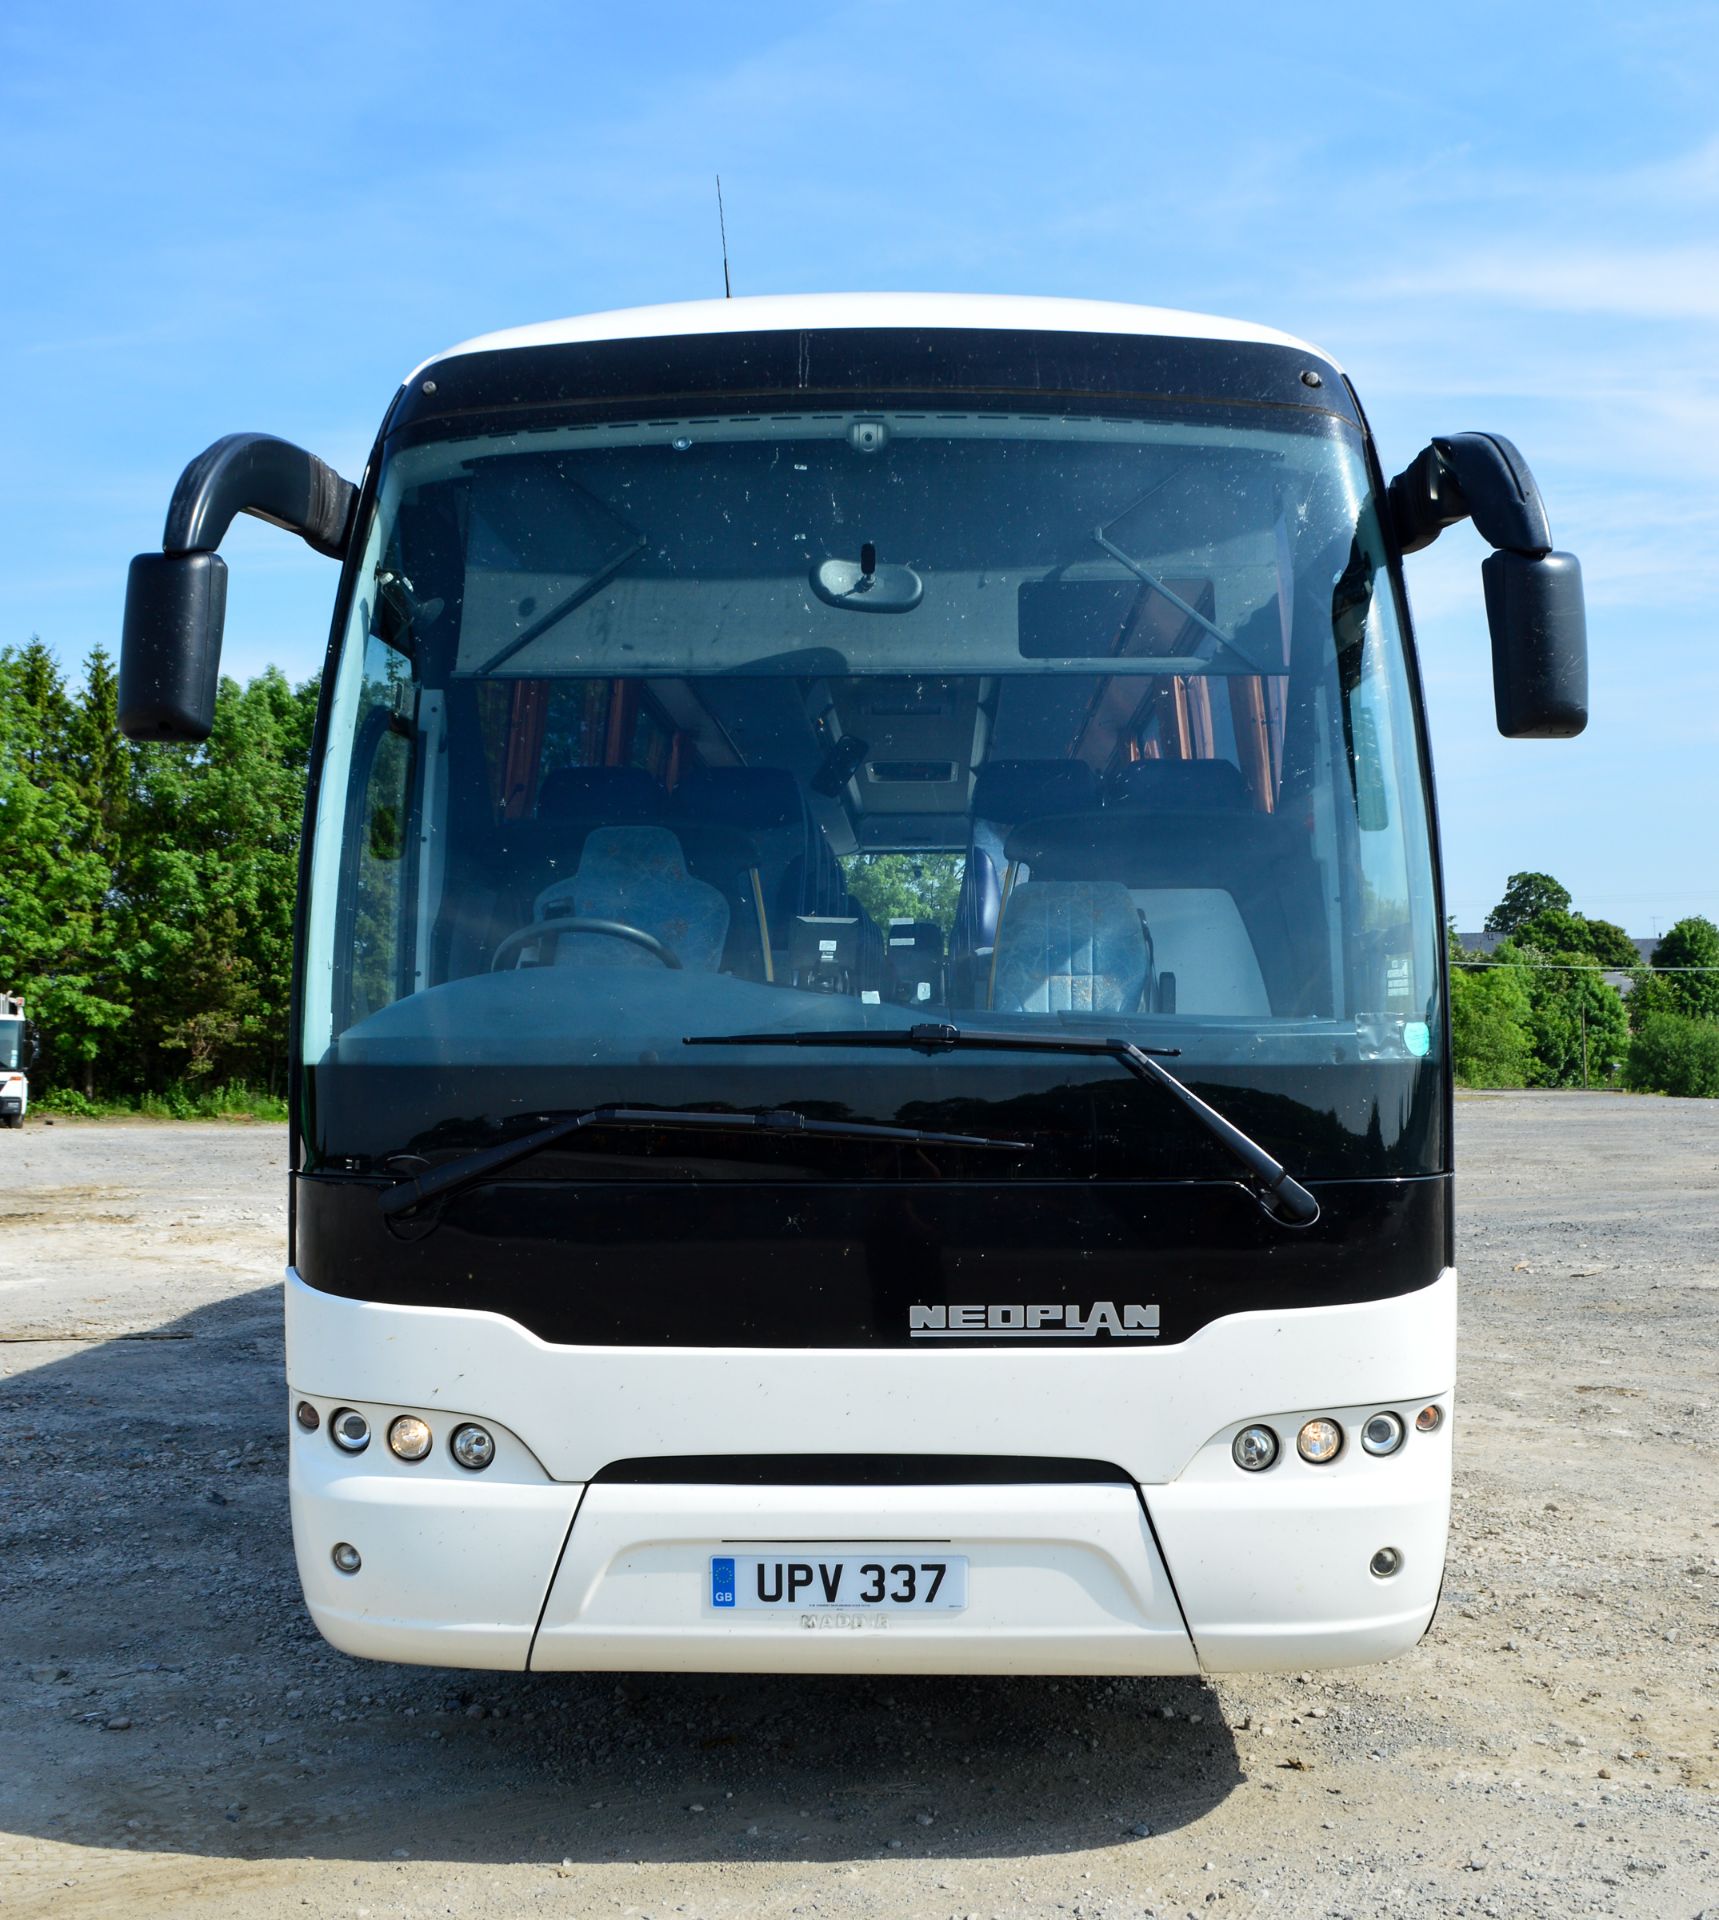 Neoplan Tourliner 49 seat luxury coach Registration Number: MJ11 KVG (UPV 337 has been retained) - Image 5 of 11